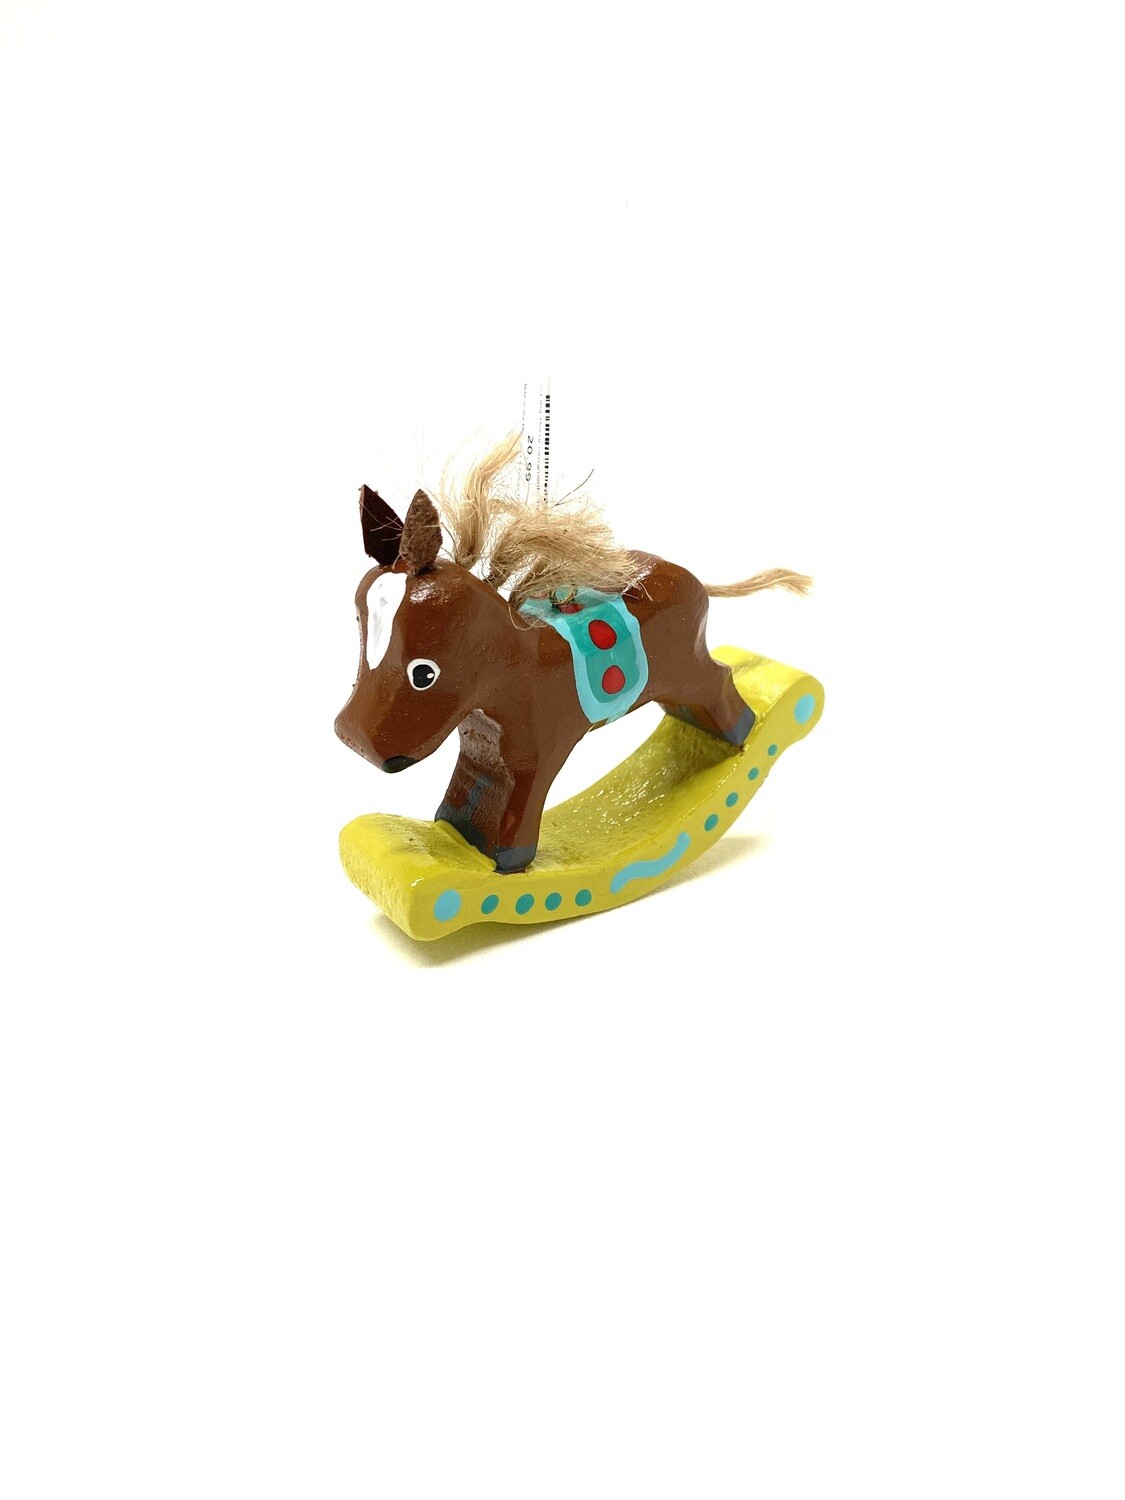 Rocking Horse Ornament- Timberdoodle